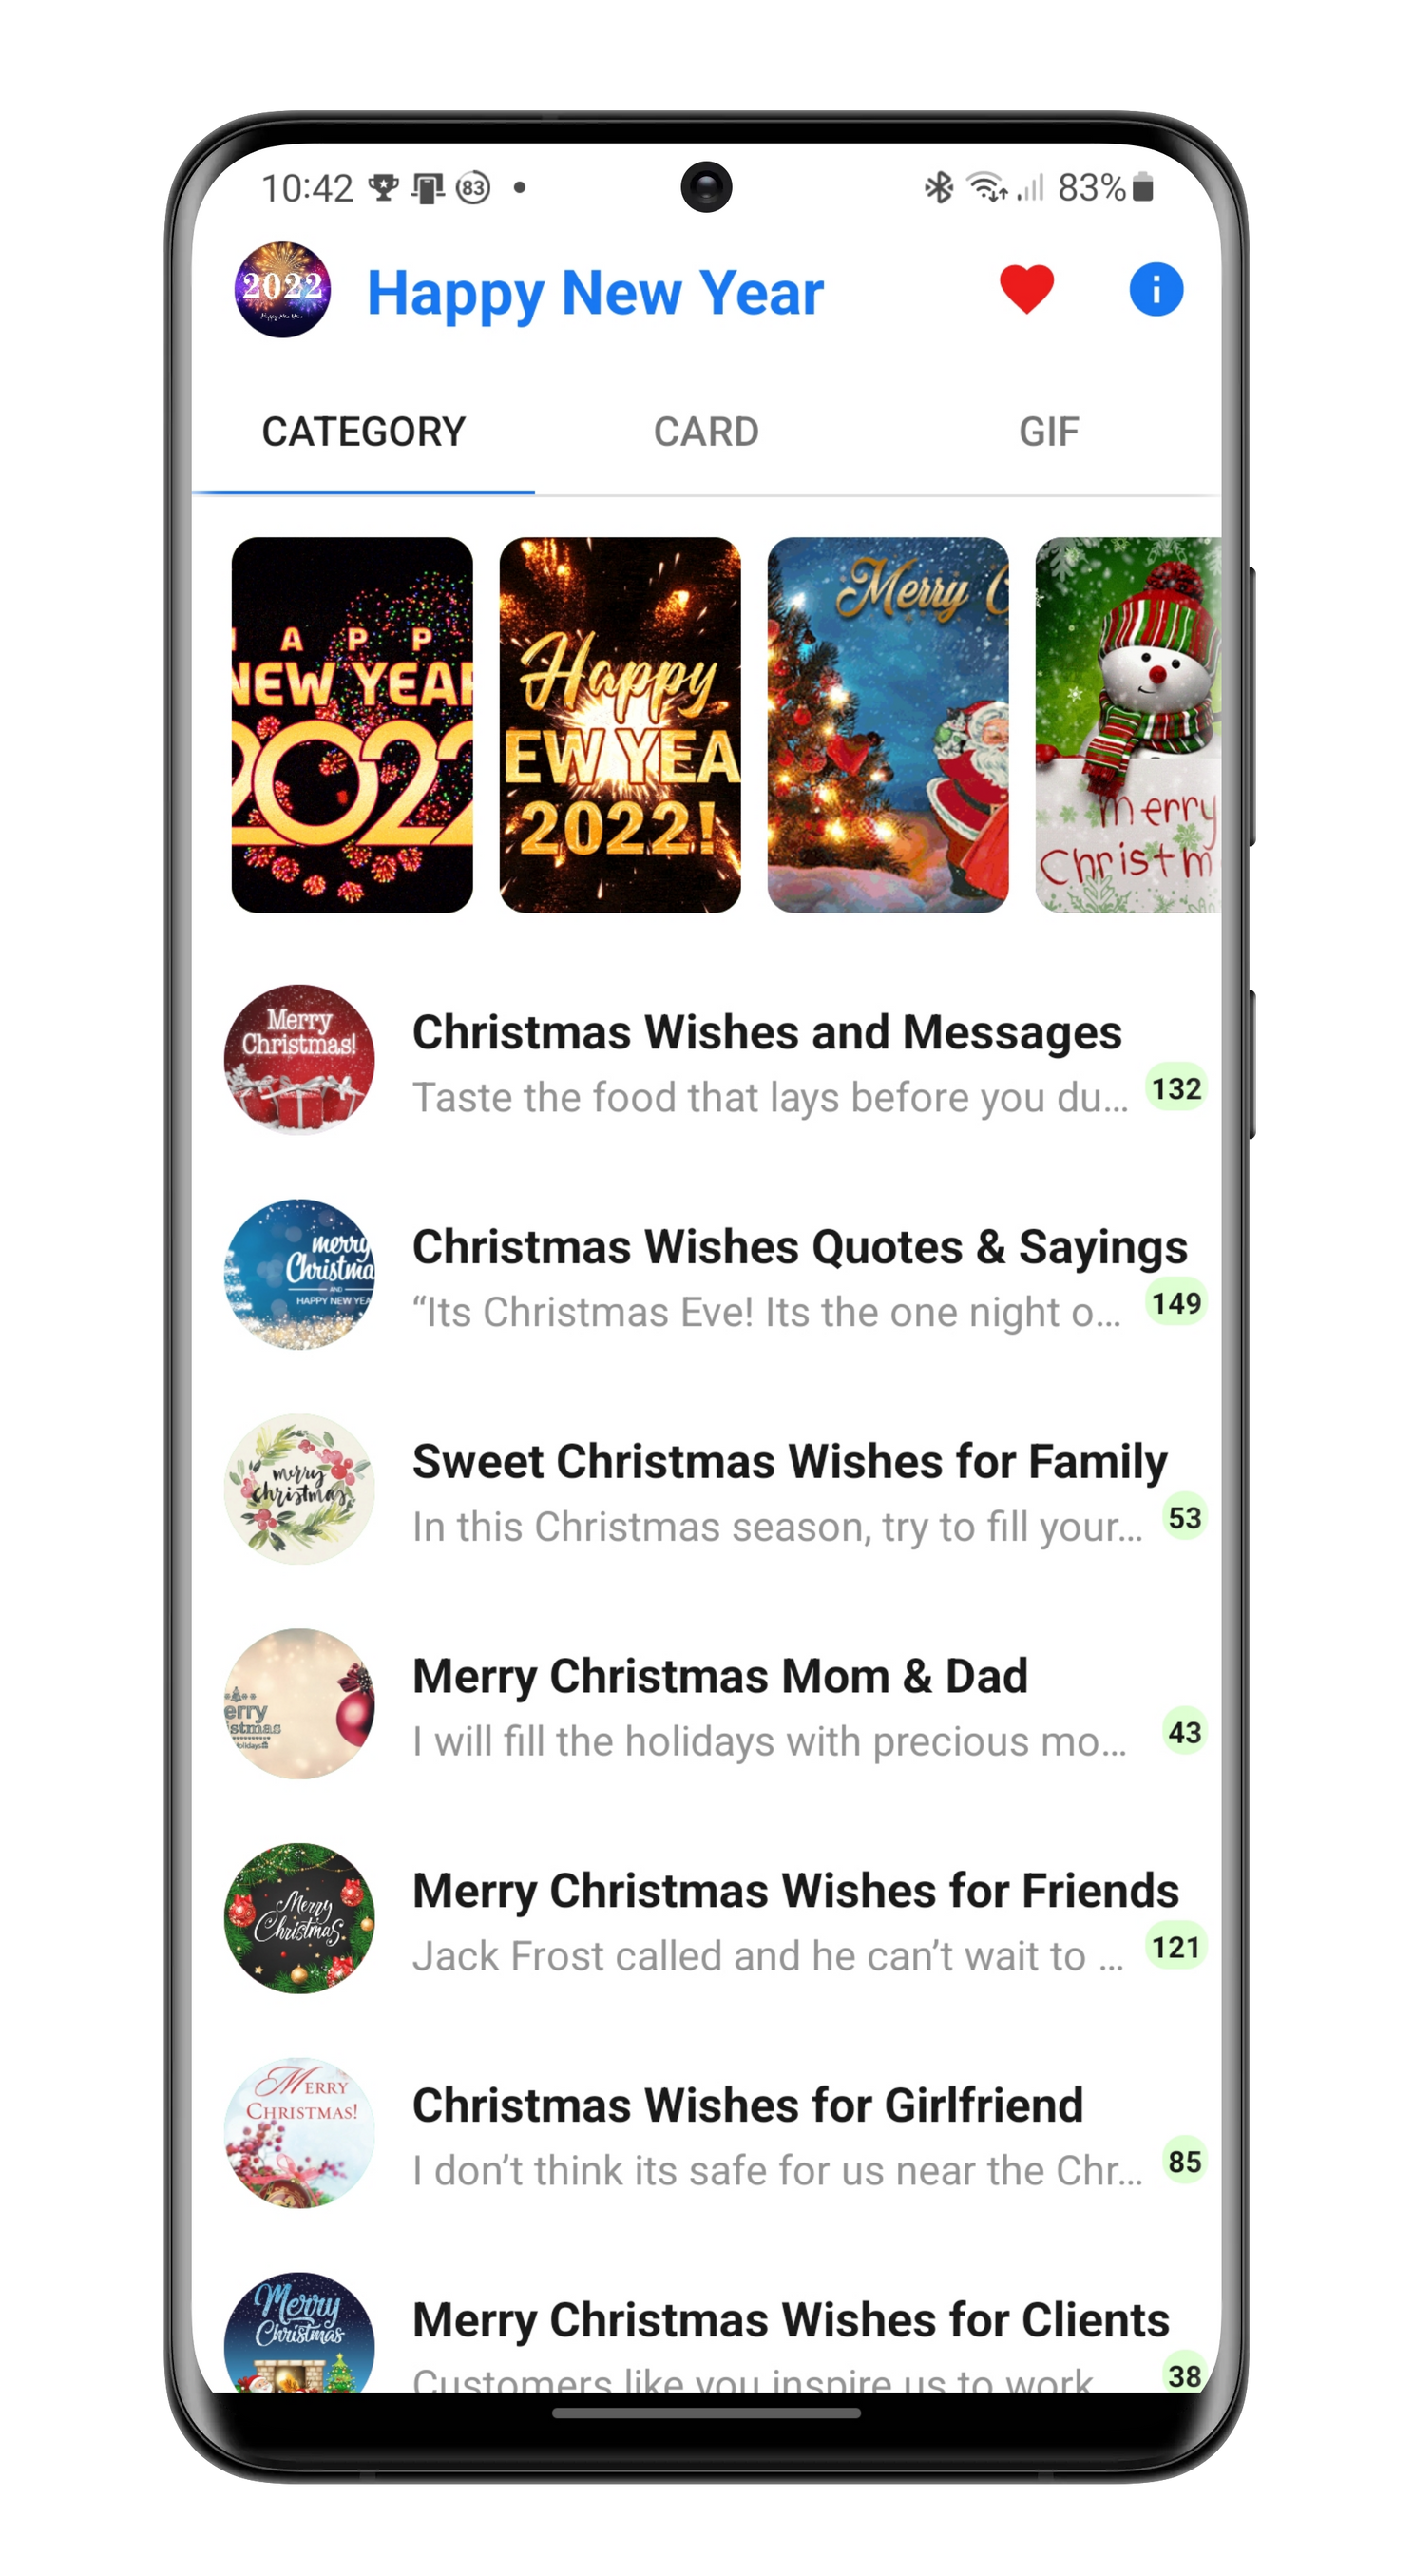 Send Christmas and New Year wishes via WhatsApp, everything you want to know